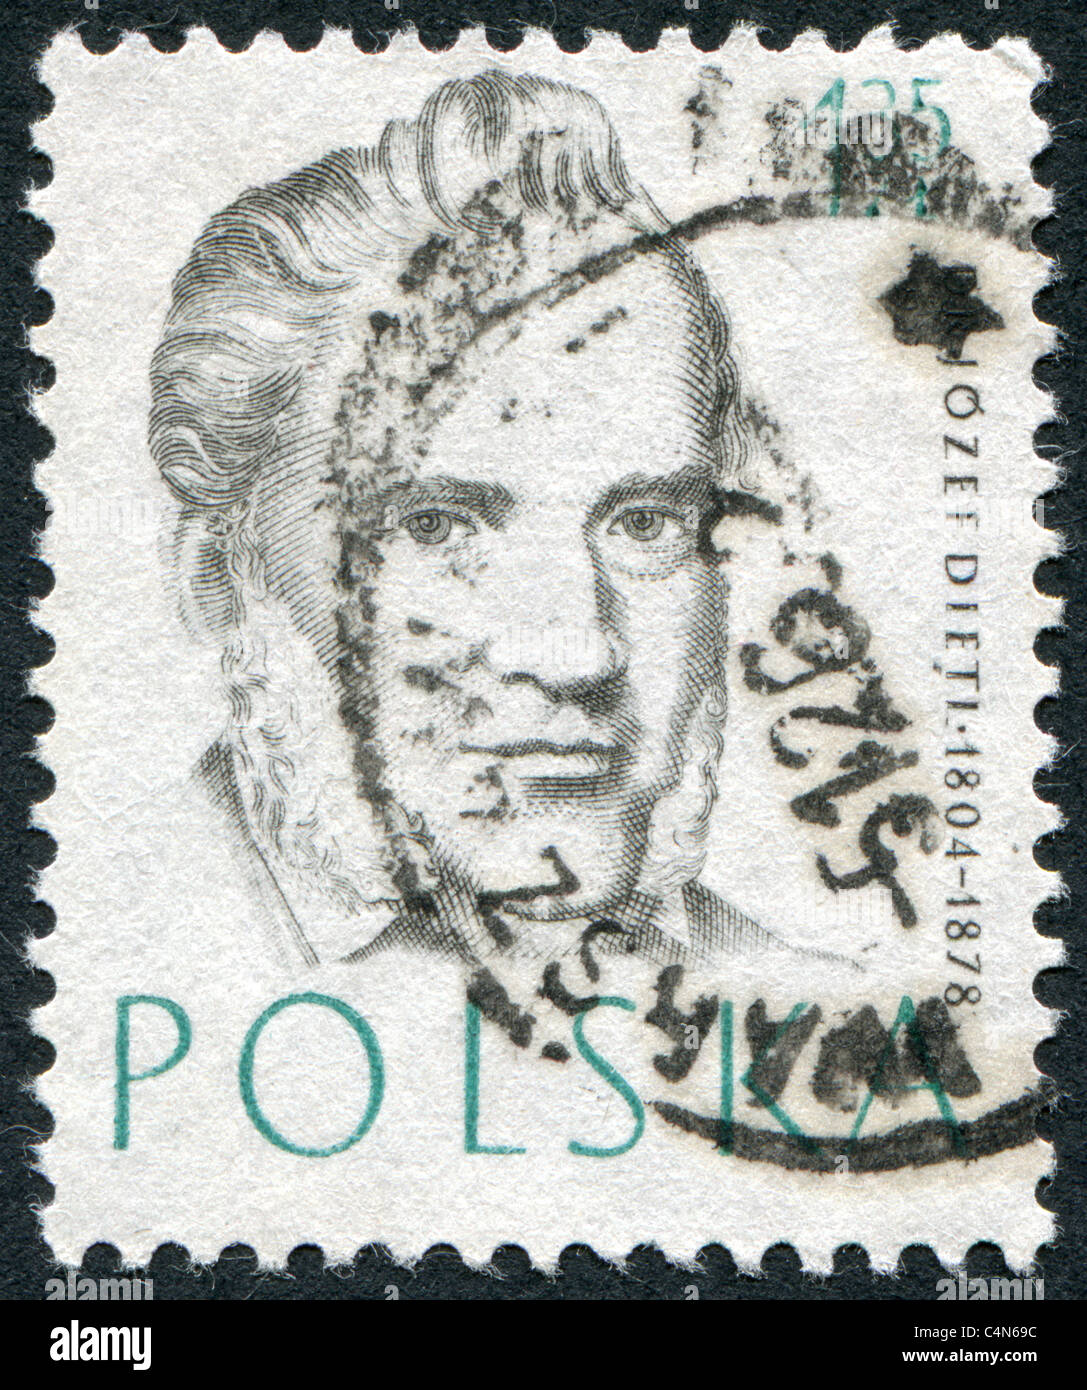 POLAND 1957: A stamp printed in the Poland, the portrait of Jozef Dietl Stock Photo